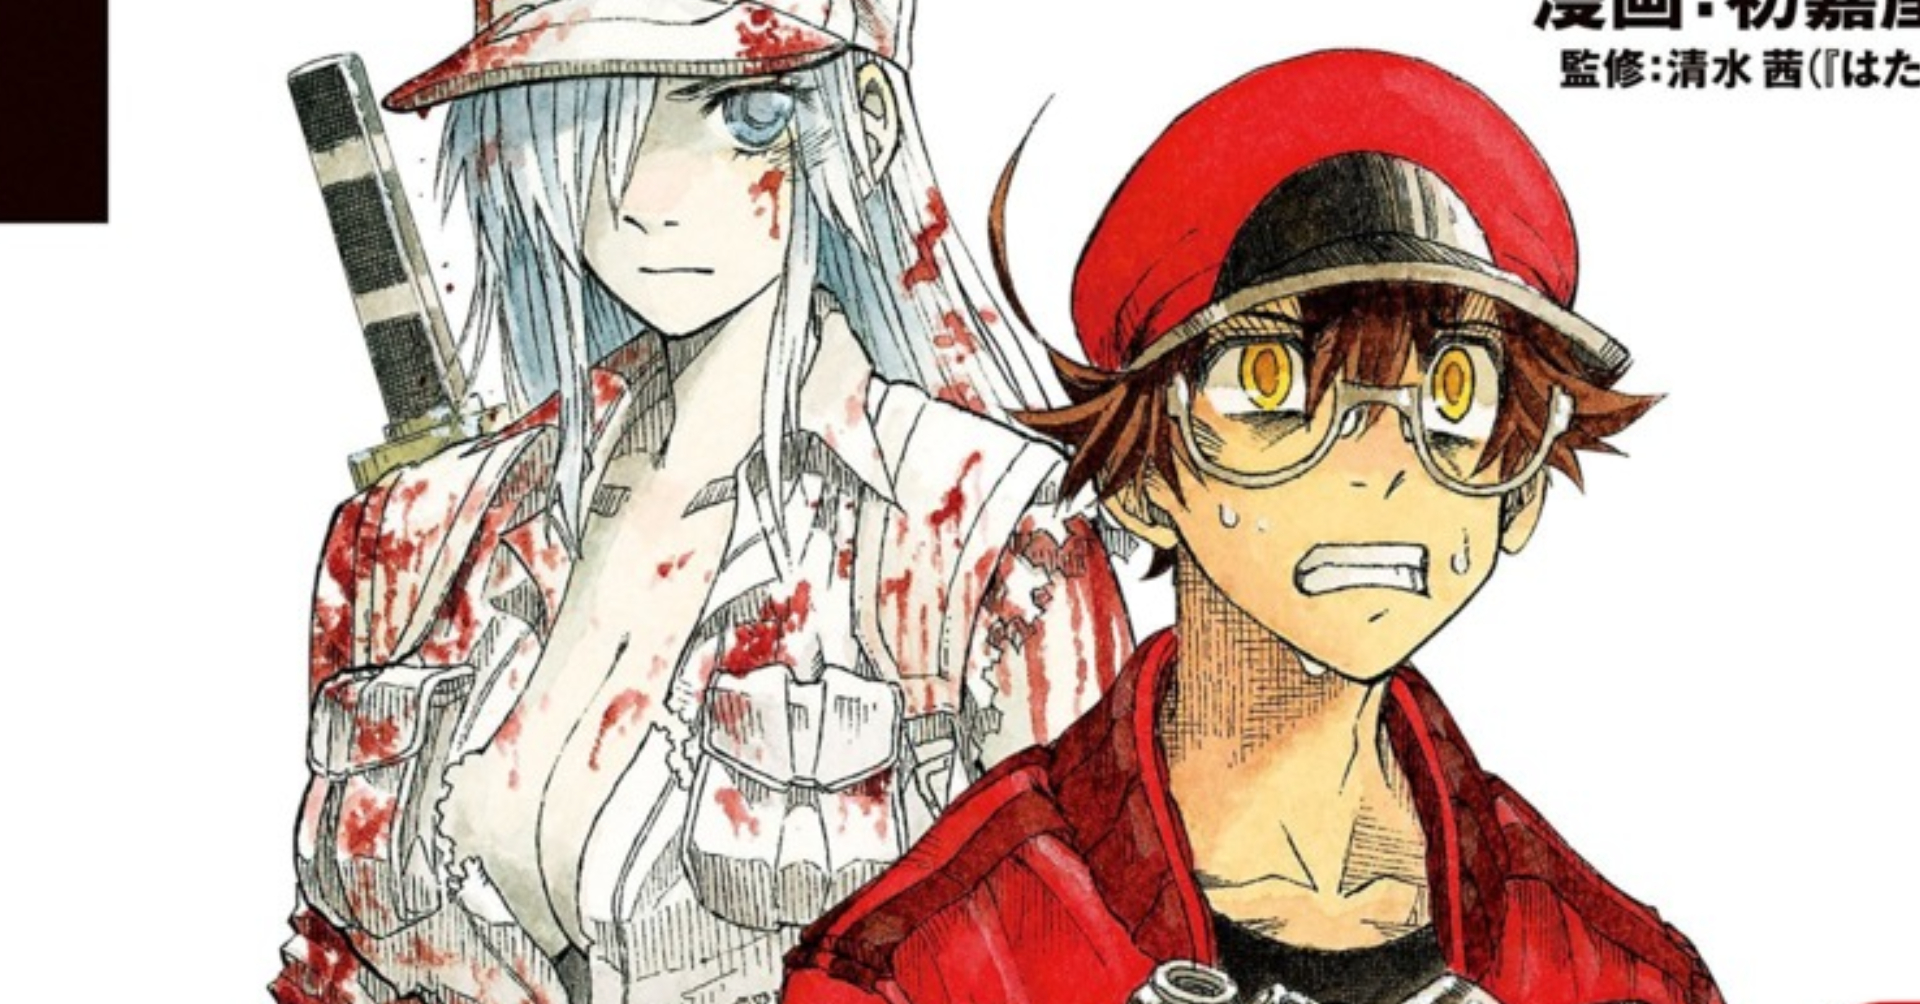 cells at work code black will end on january 21